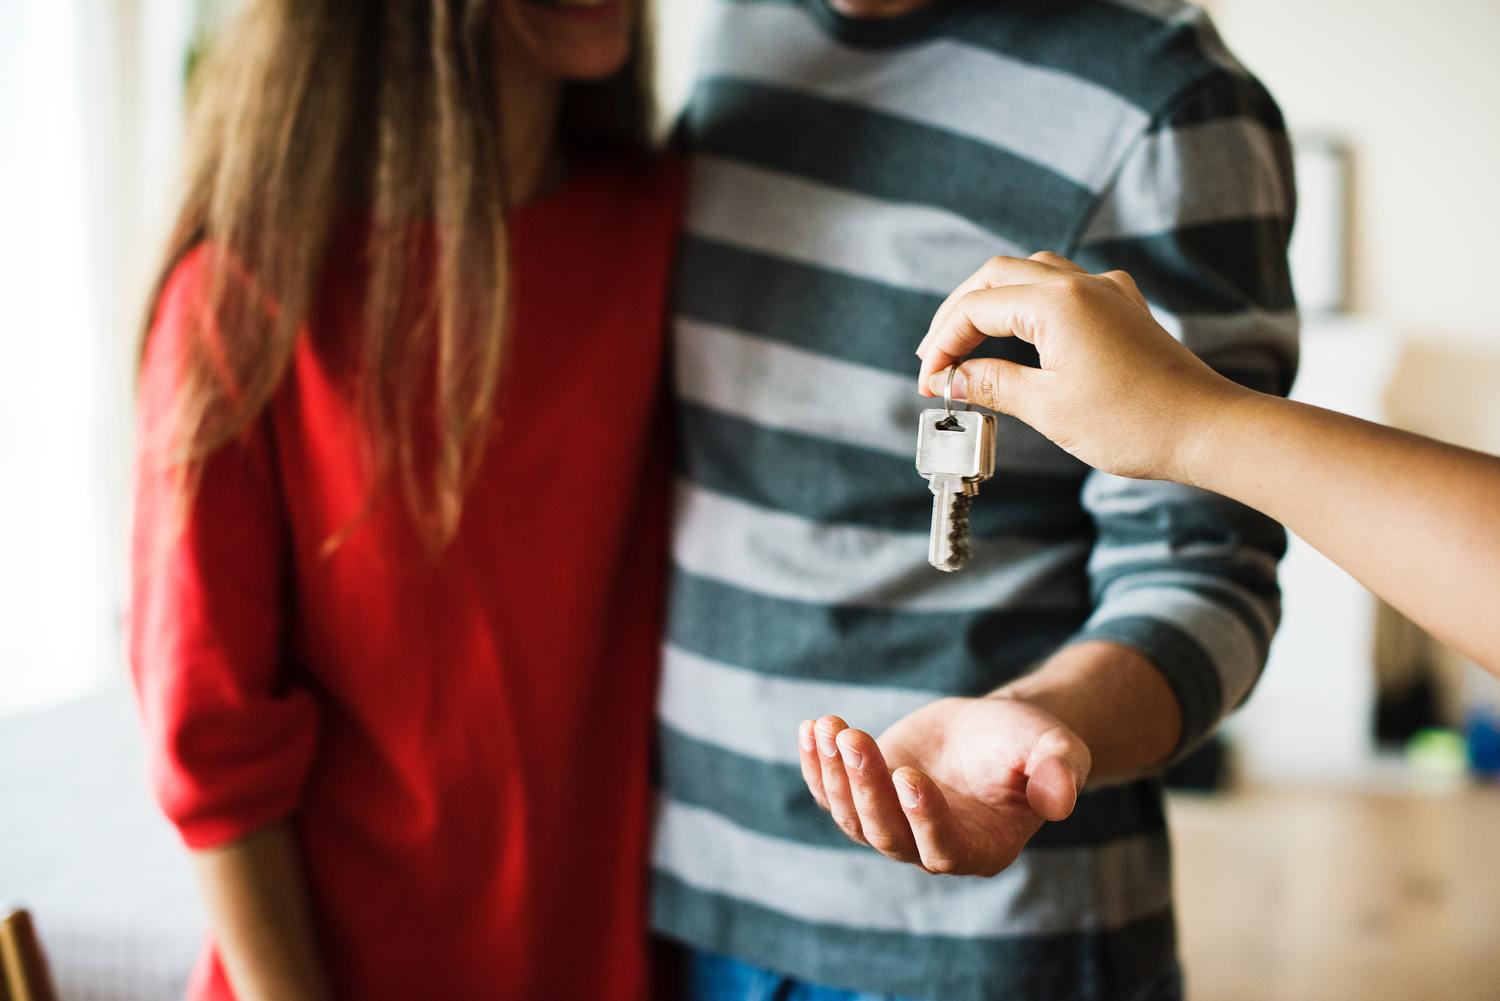 <span style="font-weight: bold;">FIRST time homebuyers&nbsp;</span>